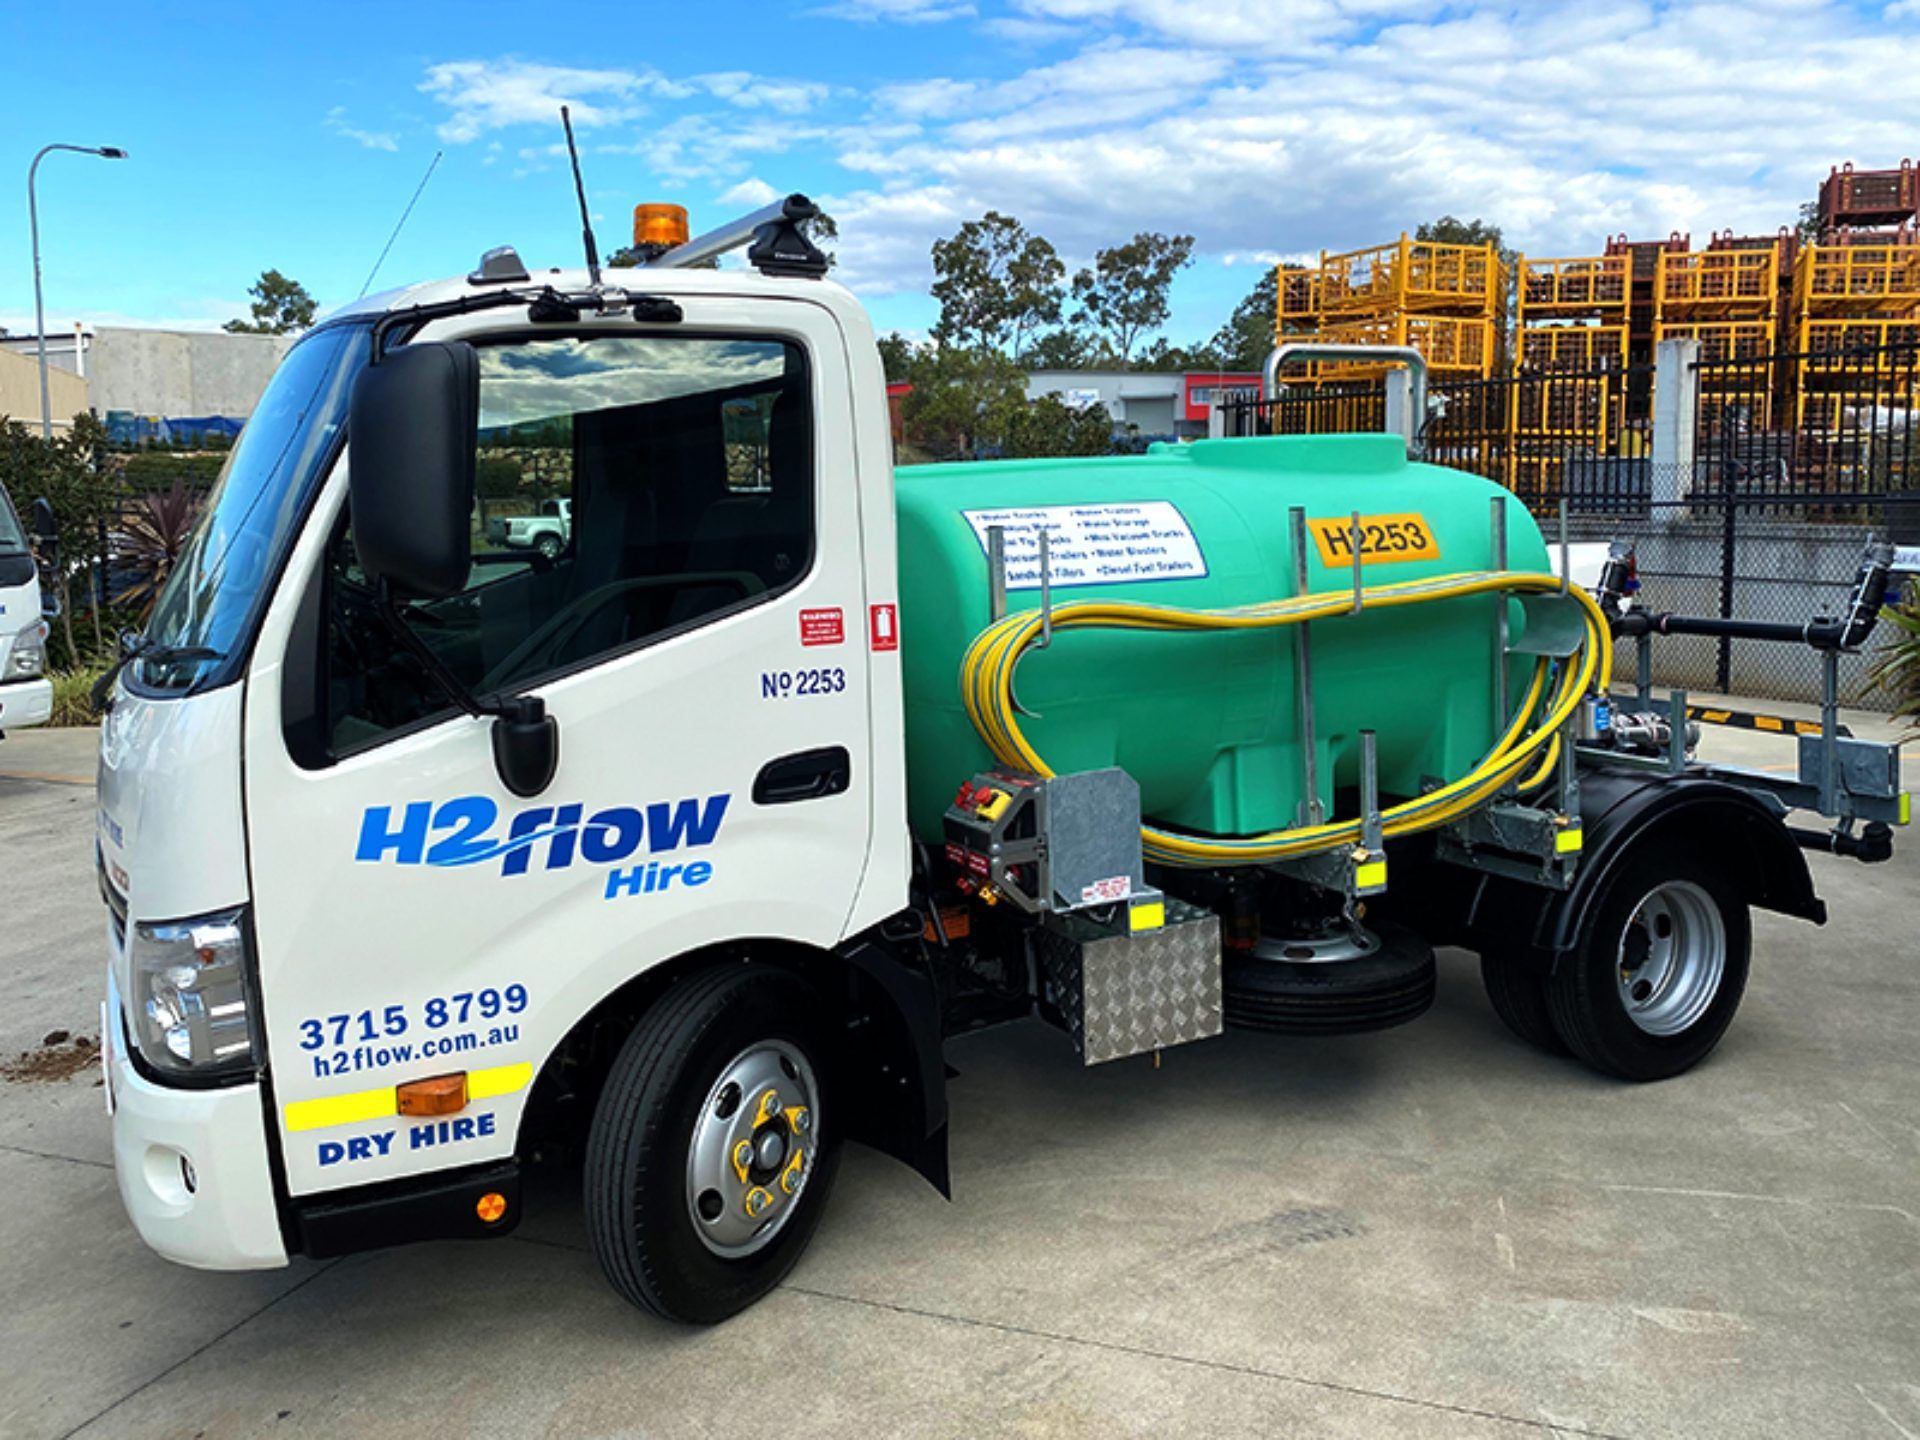 Launching our new dry hire Premium Water Truck